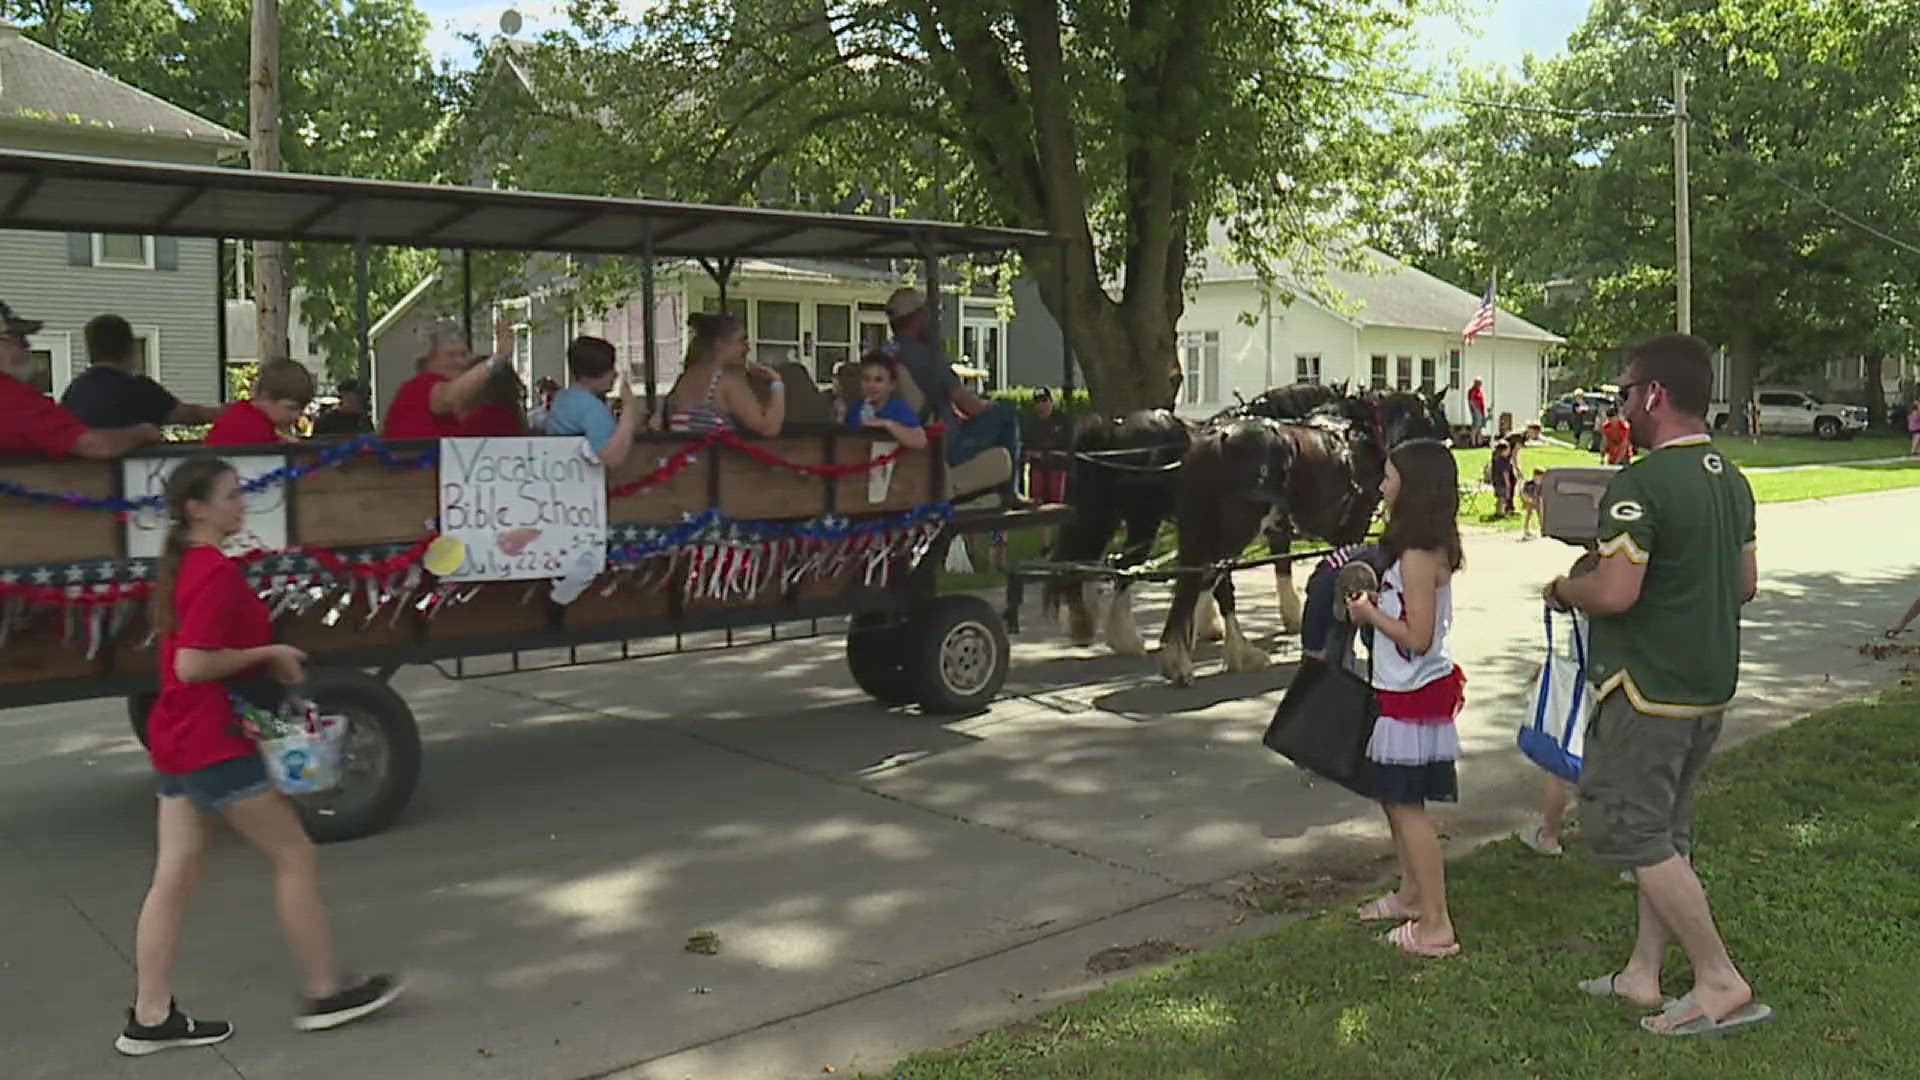 The city held a parade and brought in food trucks, vendors and live music.